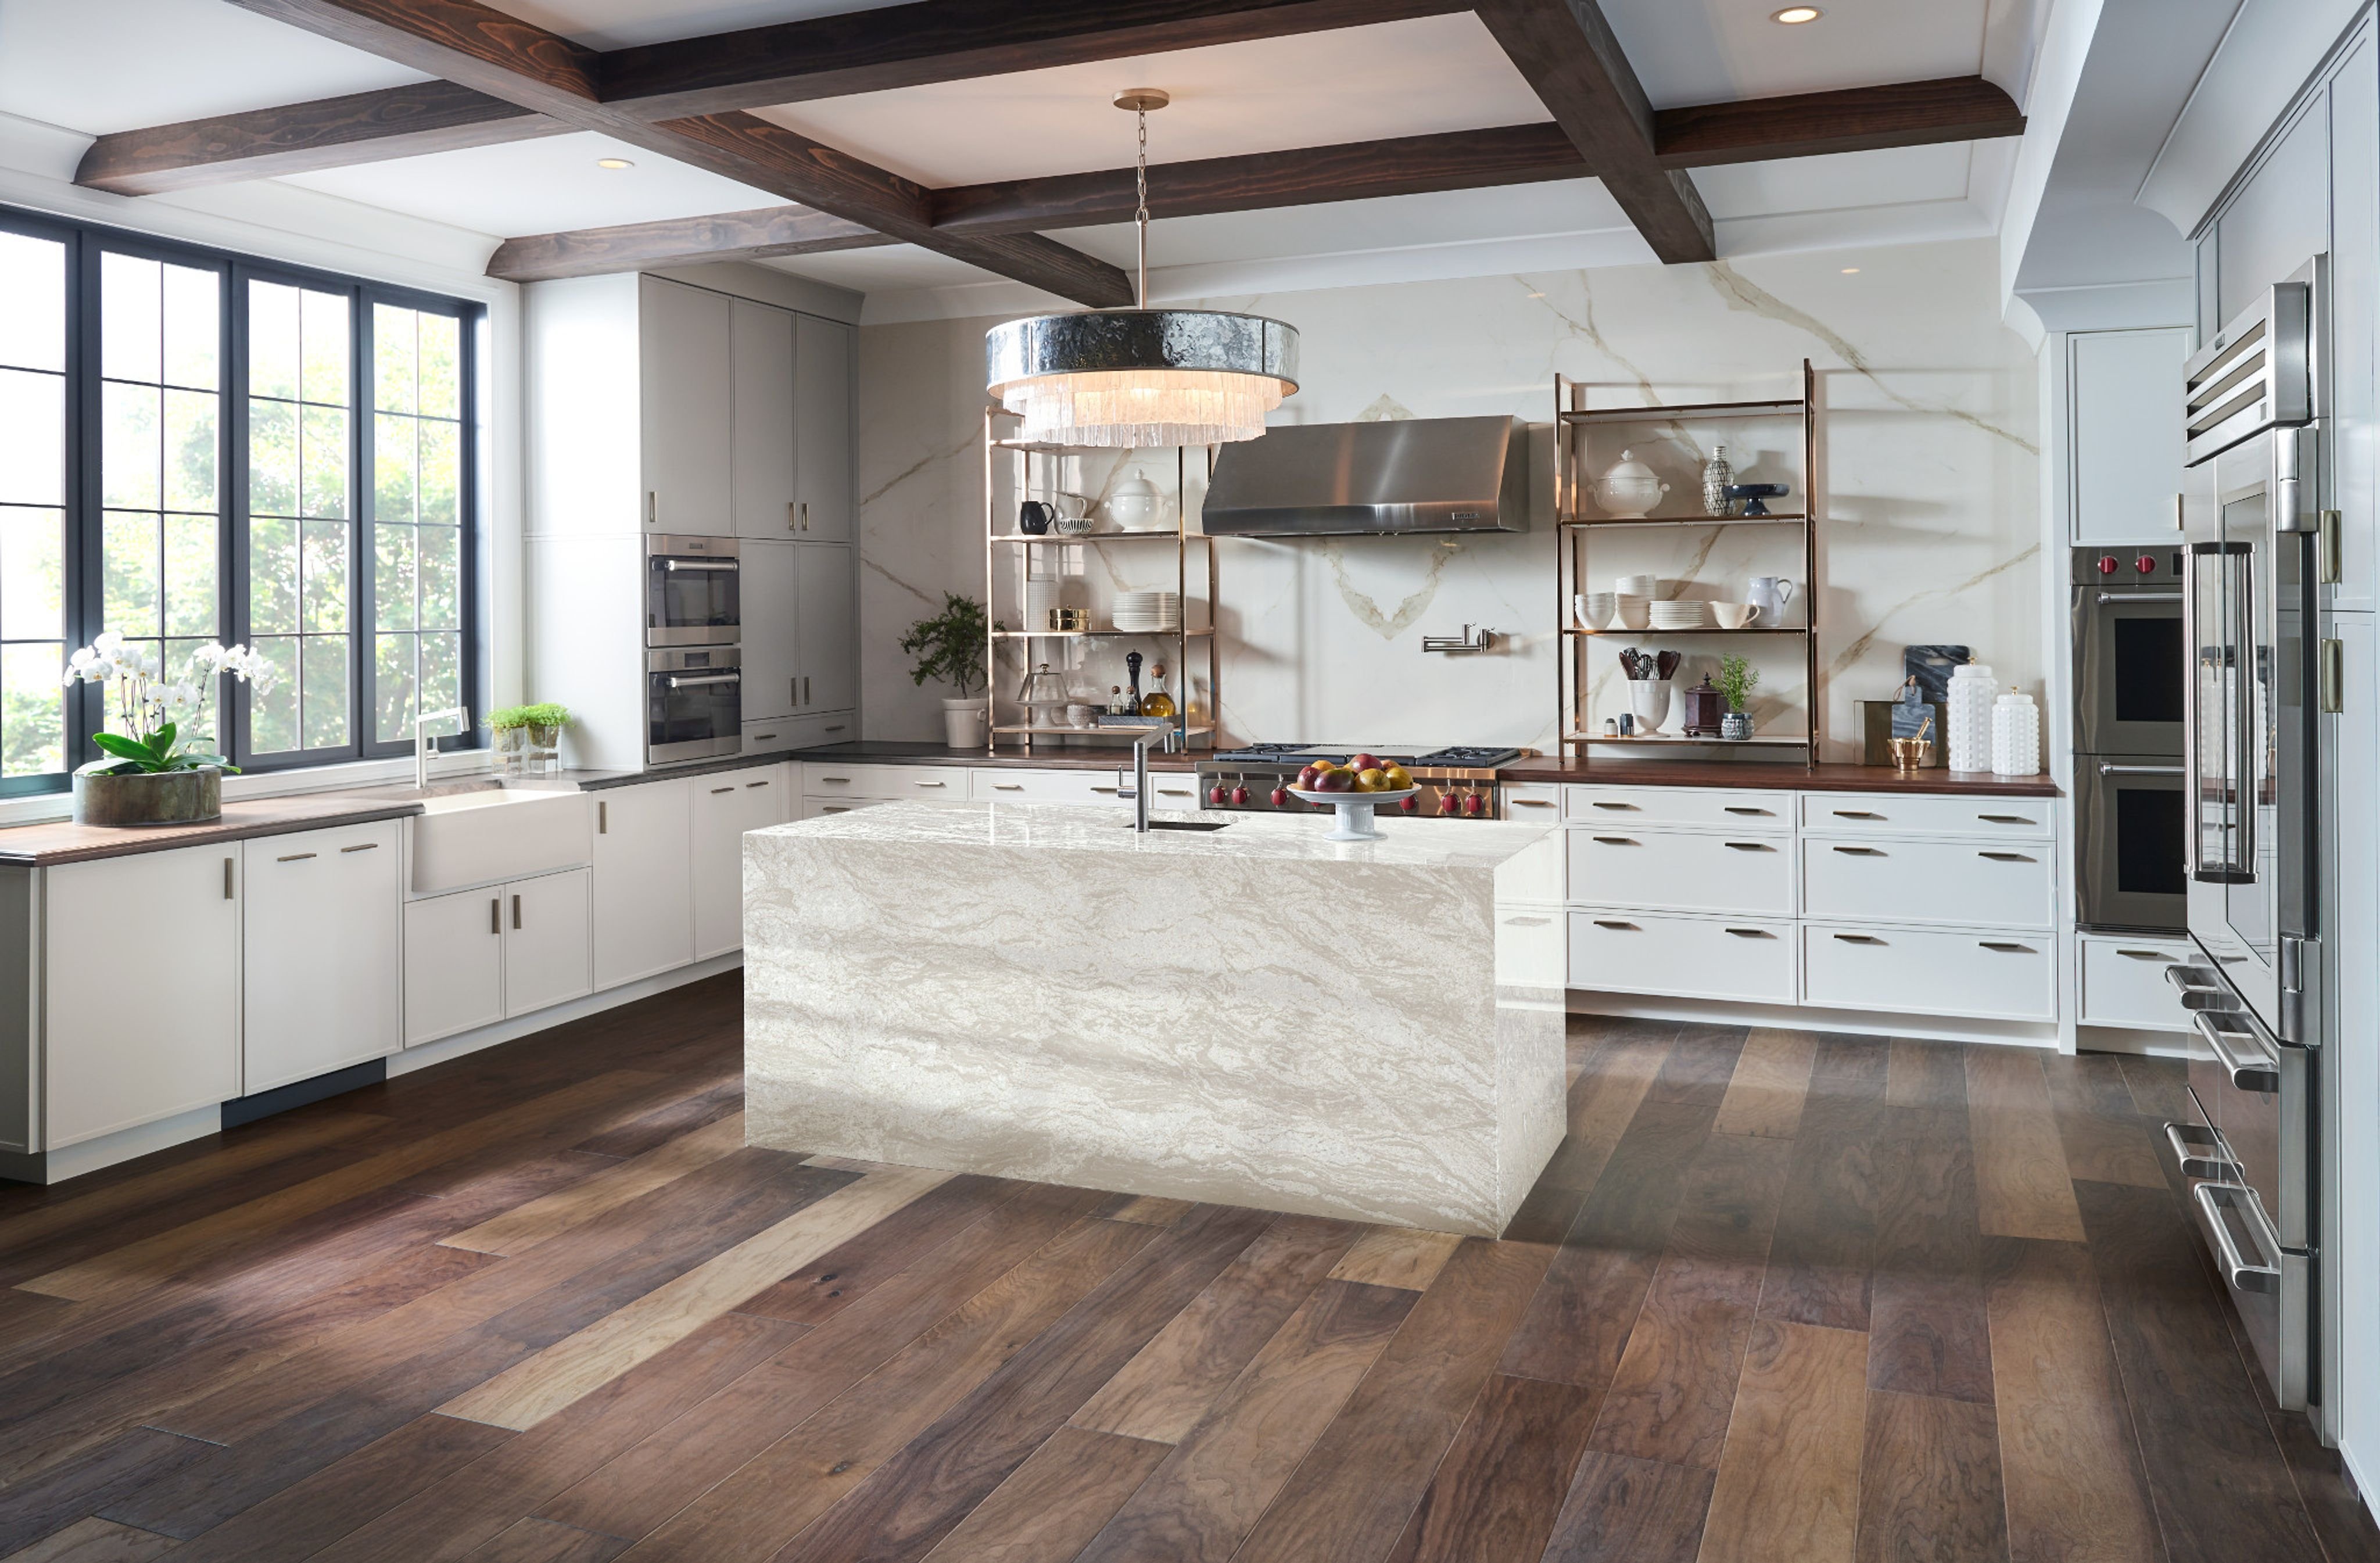 Kitchen with hardwood flooring from Wholesale Flooring and Blinds in Casper, WY